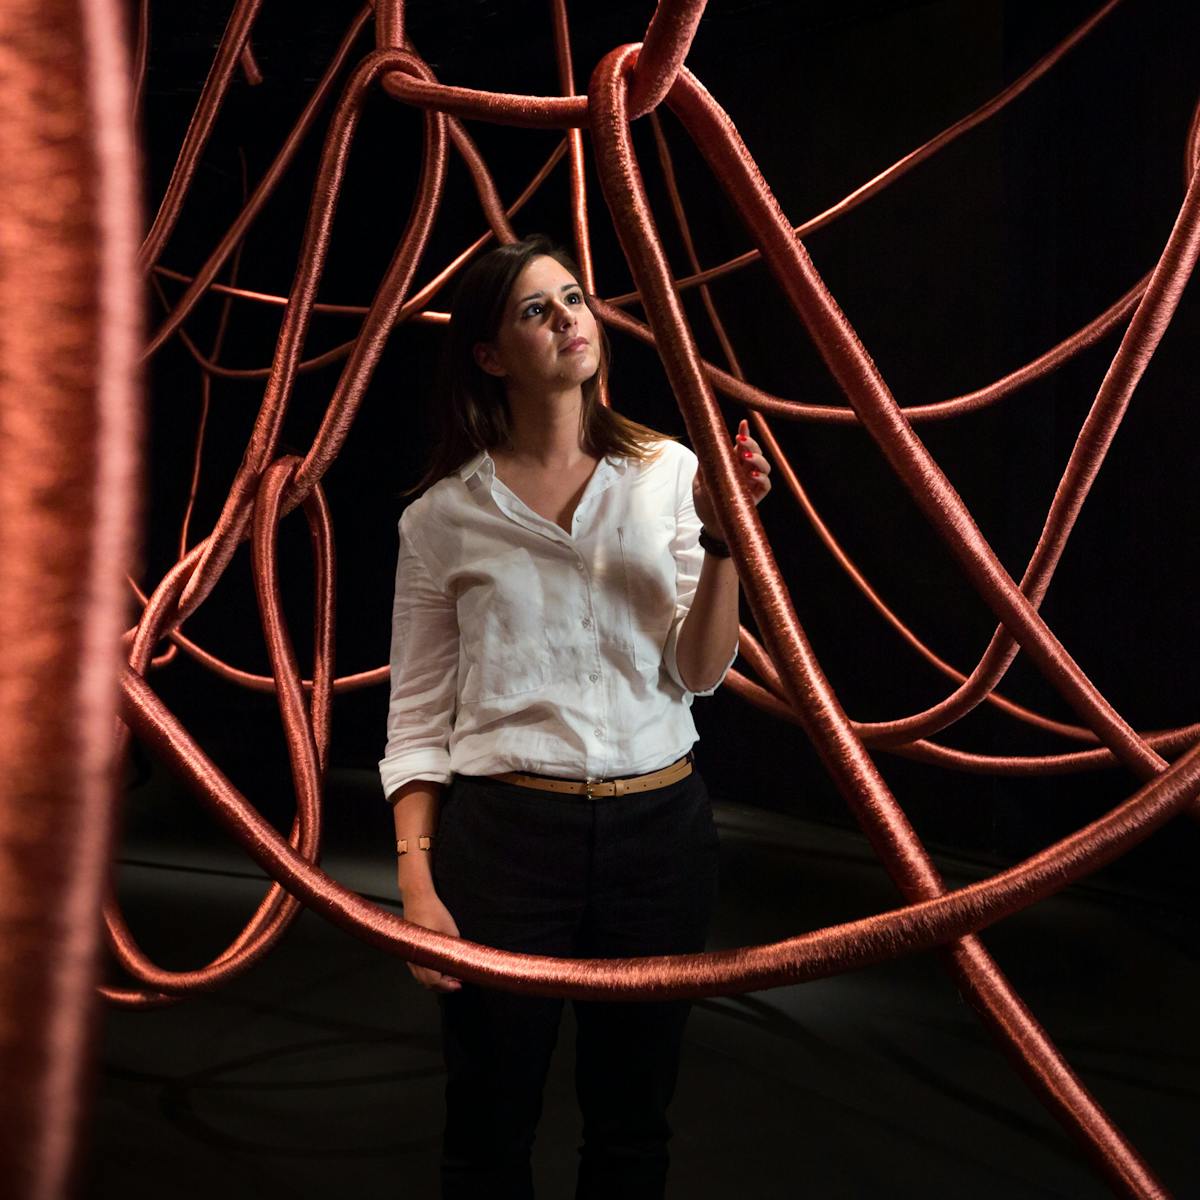 Photograph of a young woman exploring the exhibition, Alice Anderson: Memory Movement Memory Objects. She is standing in a dark gallery space surrounded by think hanging copper ropes.